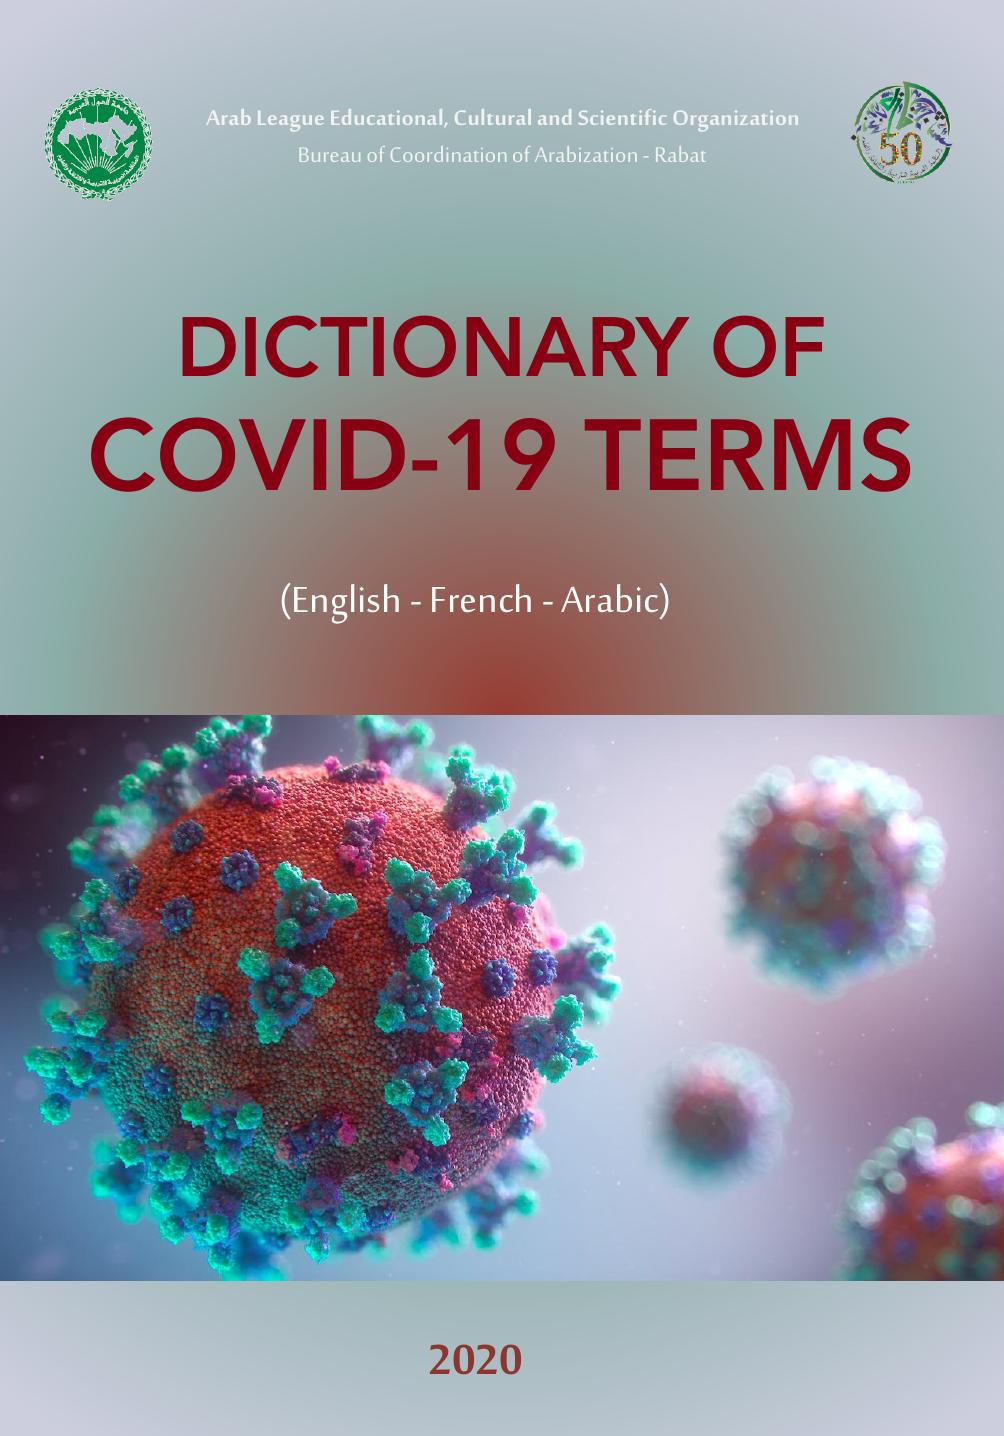 COVID19 dictionary of terms 2020